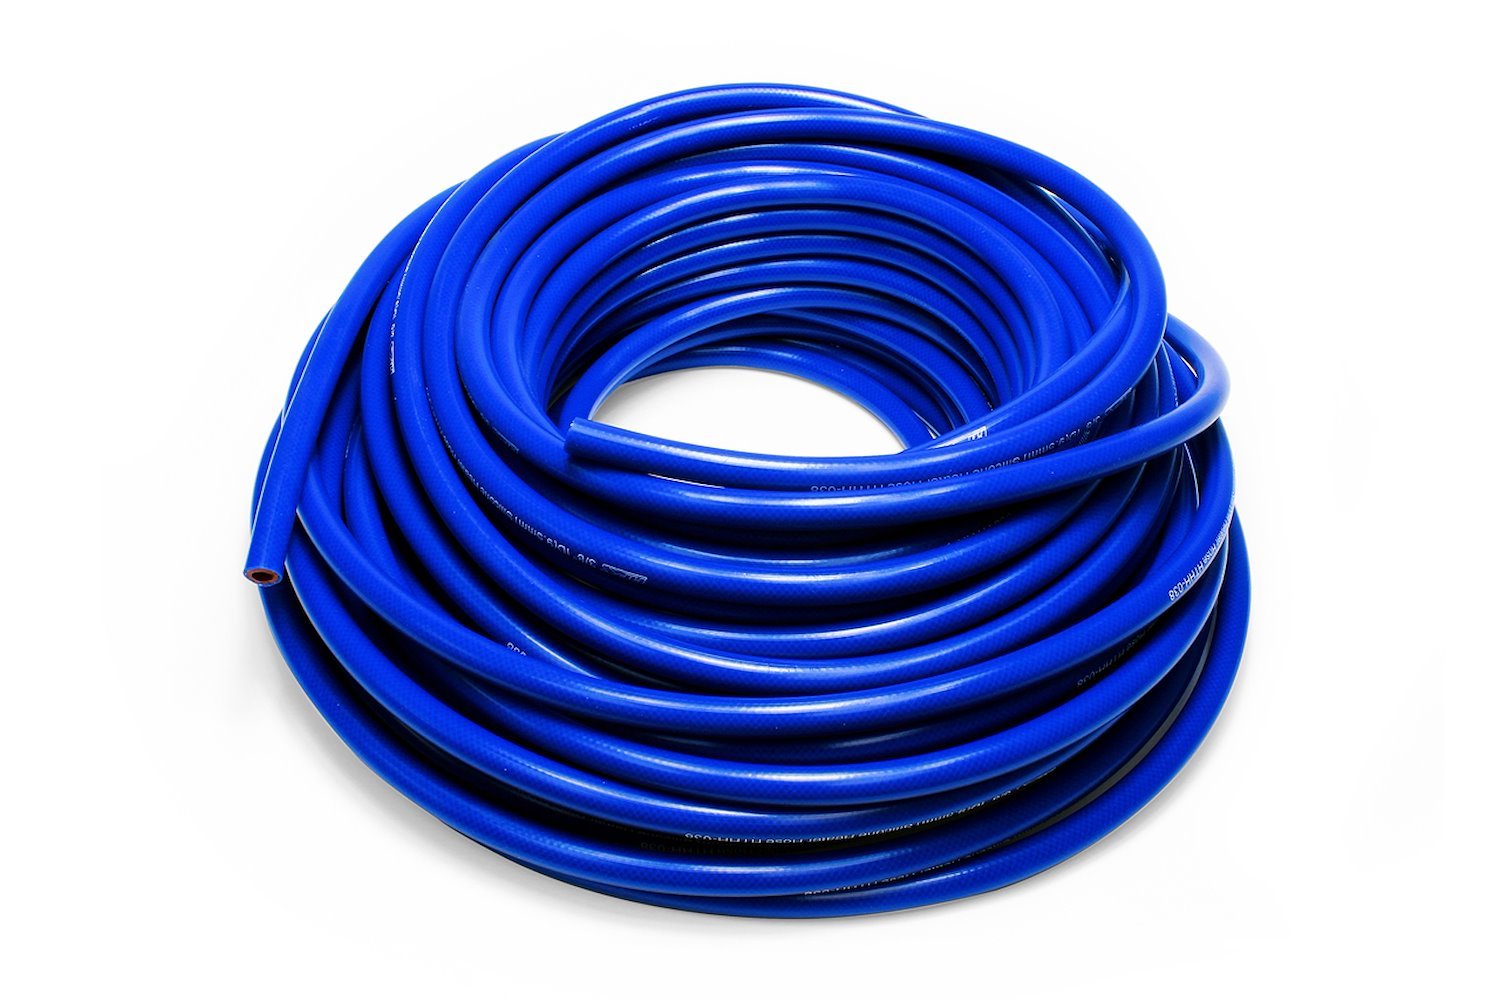 HTHH-062-BLUEx250 Silicone Heater Hose Tubing, High-Temp Reinforced, 5/8 in. ID, 250 ft. Roll, Blue